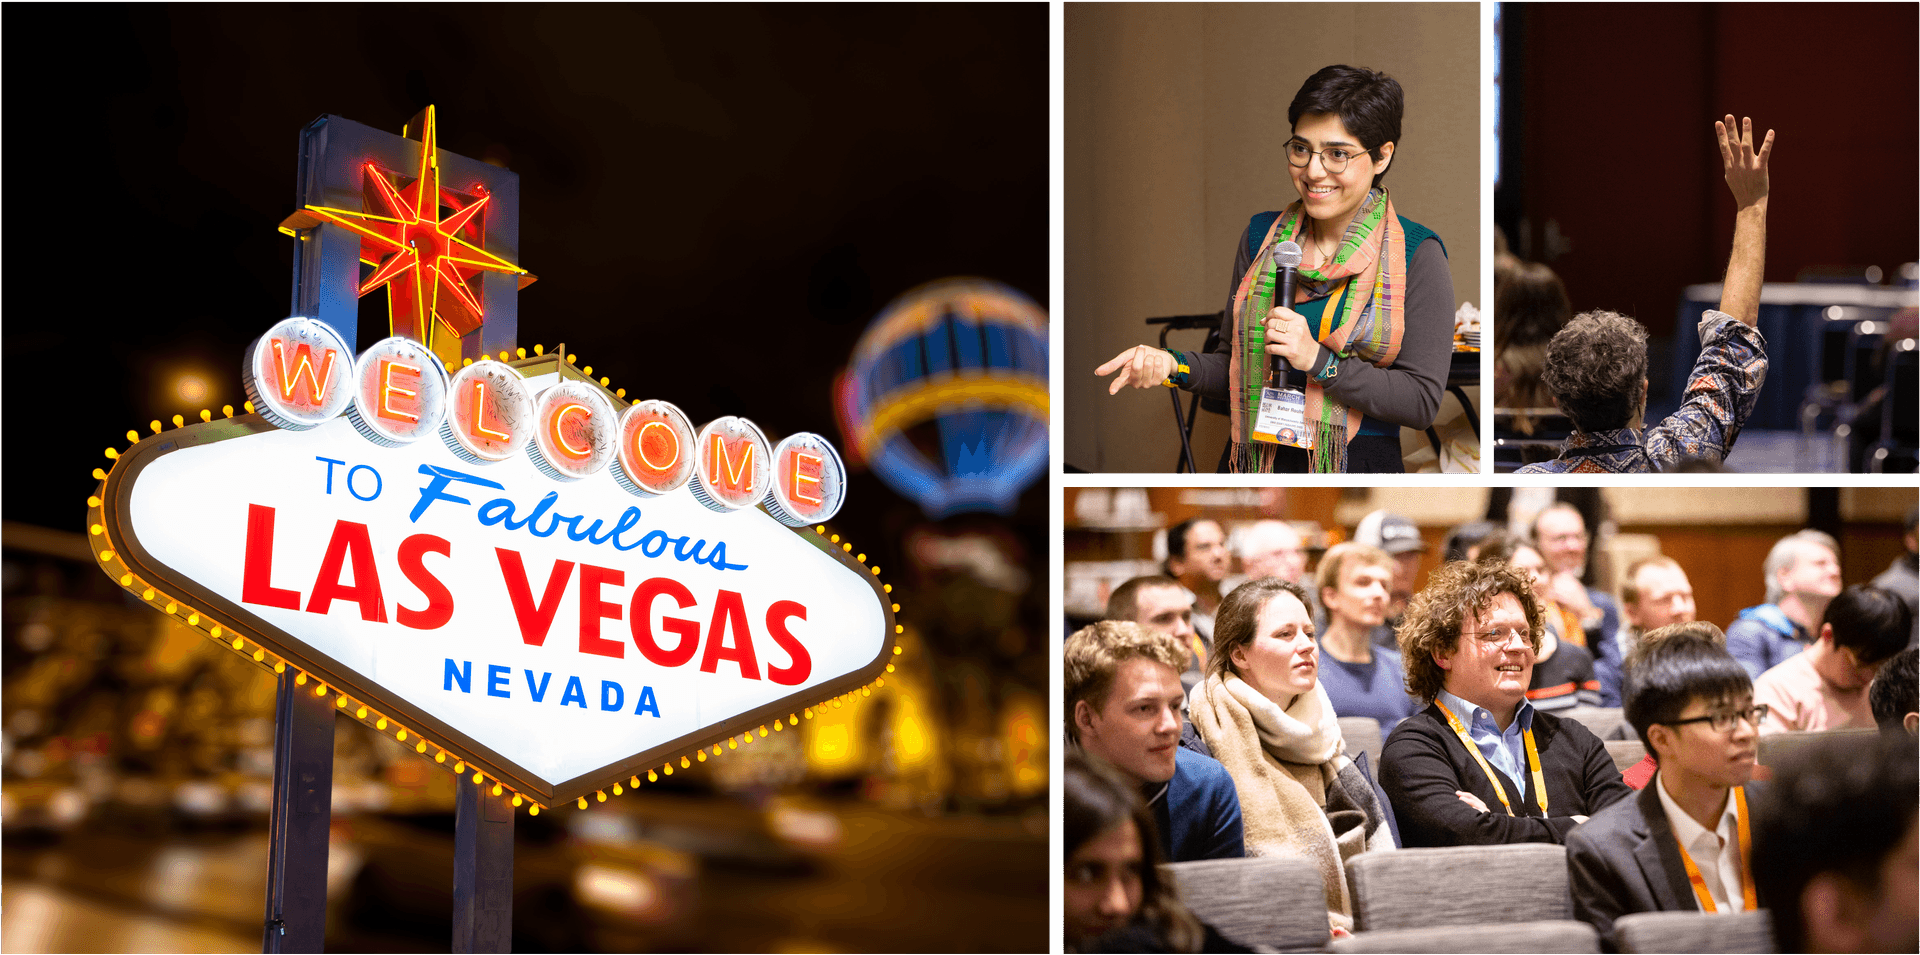 The APS March Meeting returns to Las Vegas.